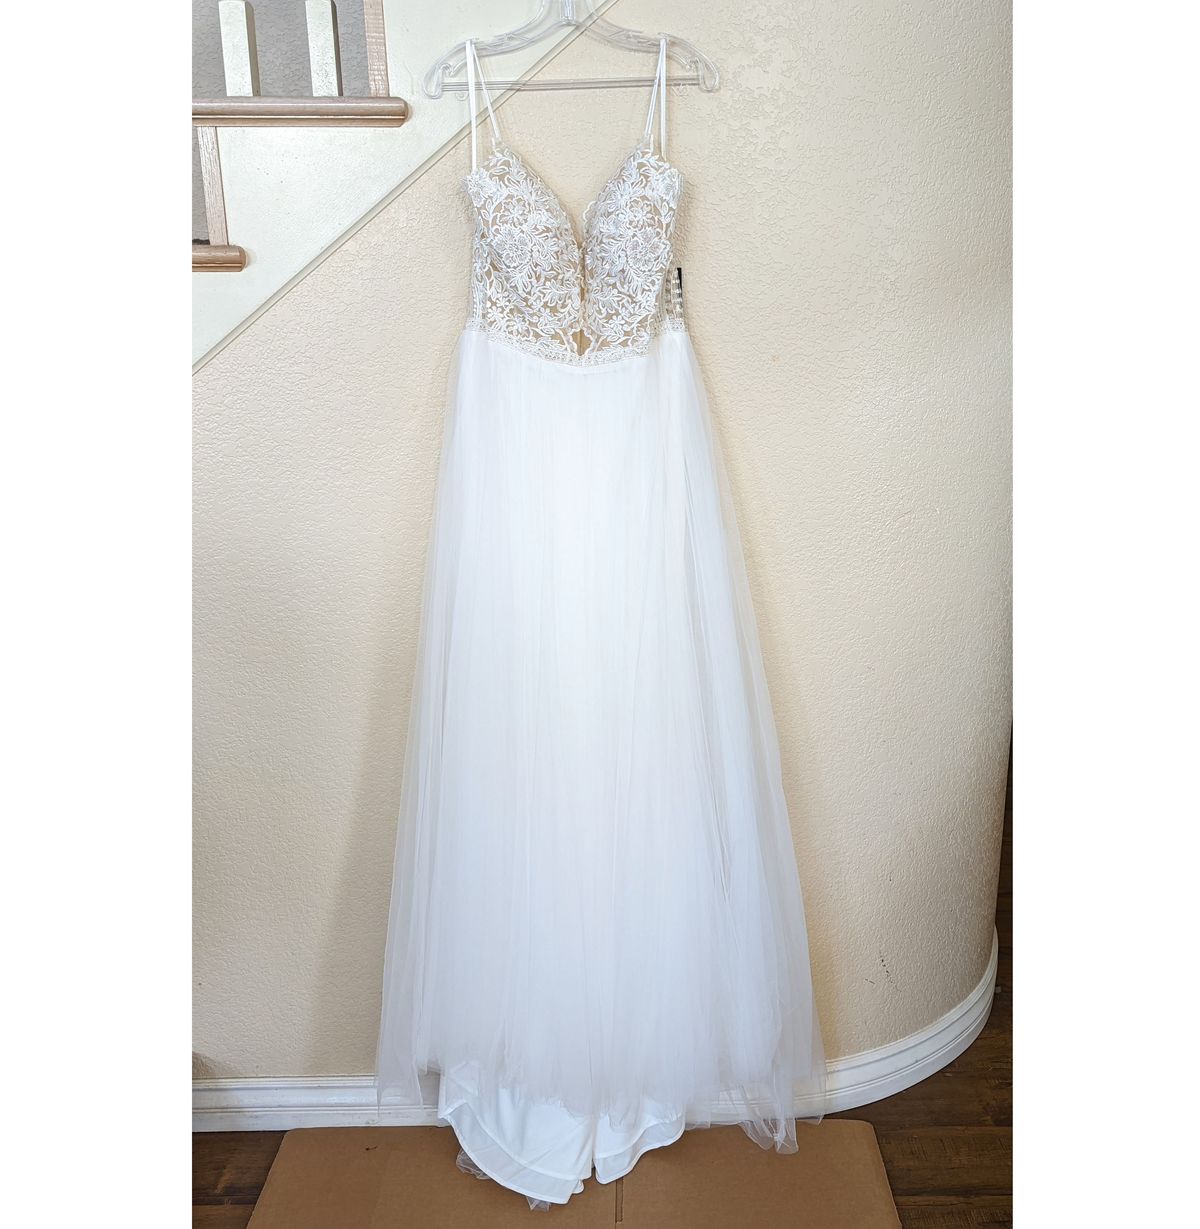 Style Off White Filigree Sequined Sweetheart Neckline Ball gown Wedding Dress Bicici & Coty Size 14 Wedding White Ball Gown on Queenly